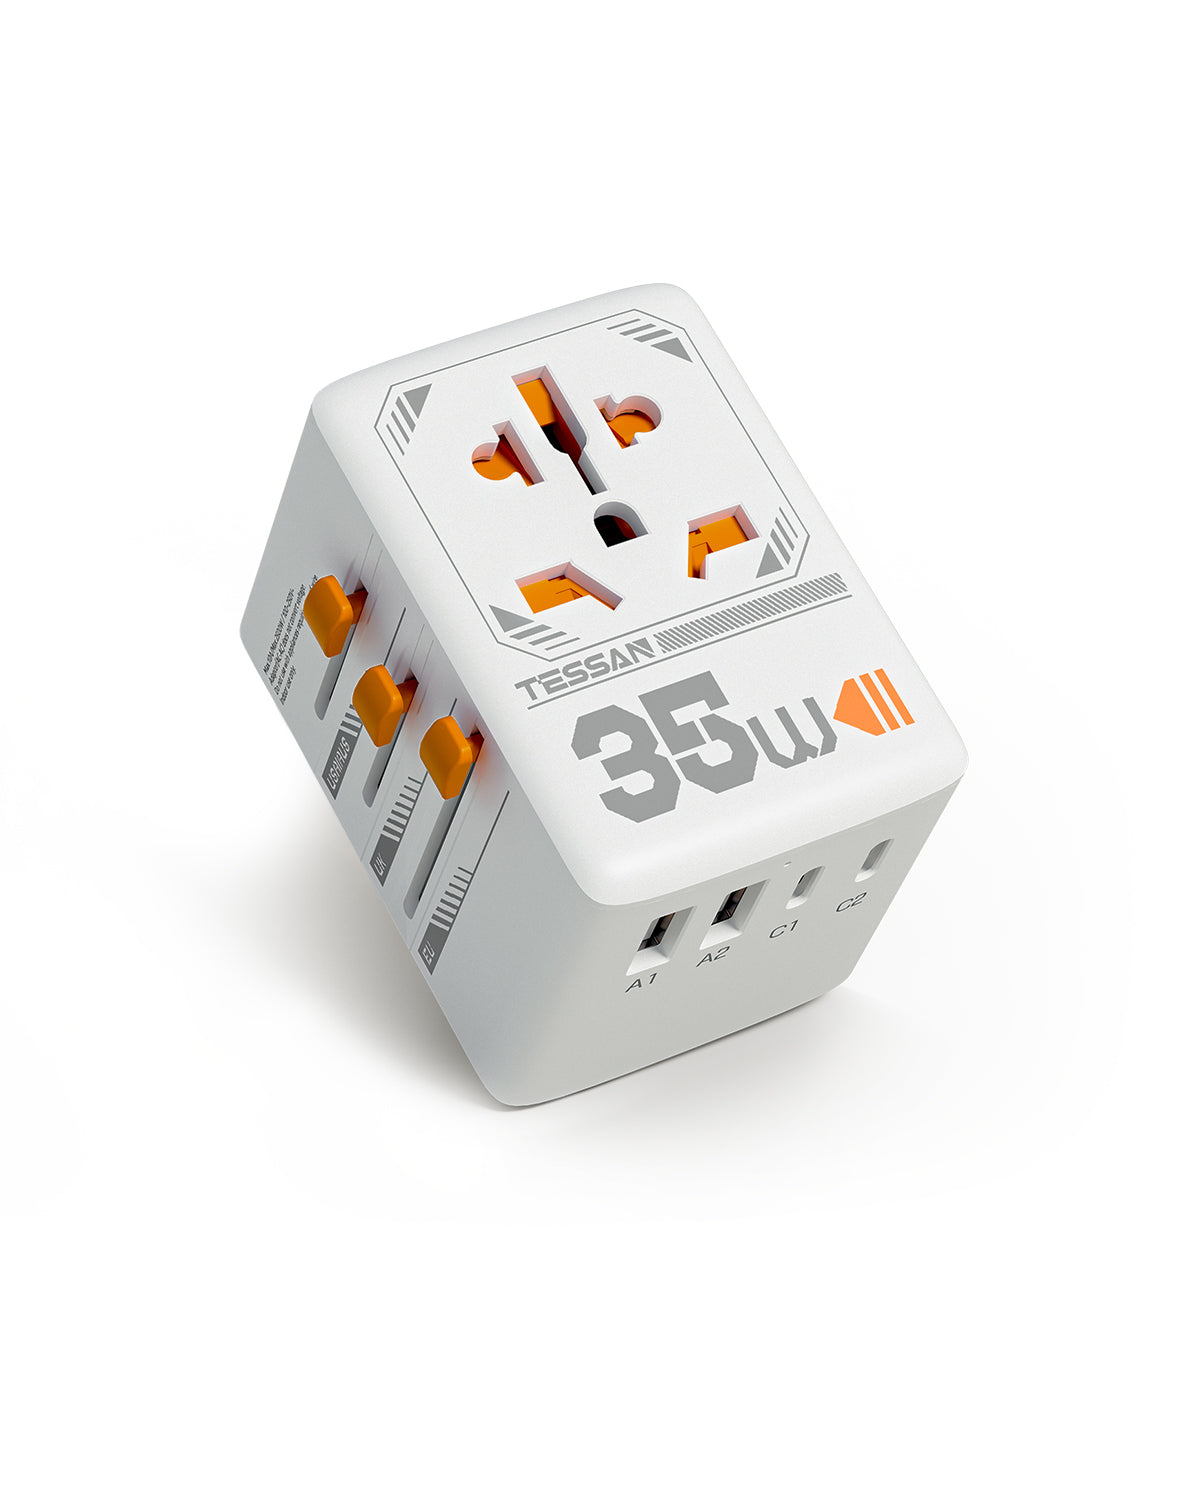 TESSAN 35W Universal Travel Adapter with 3 USB C and 2 USB A Charging Ports